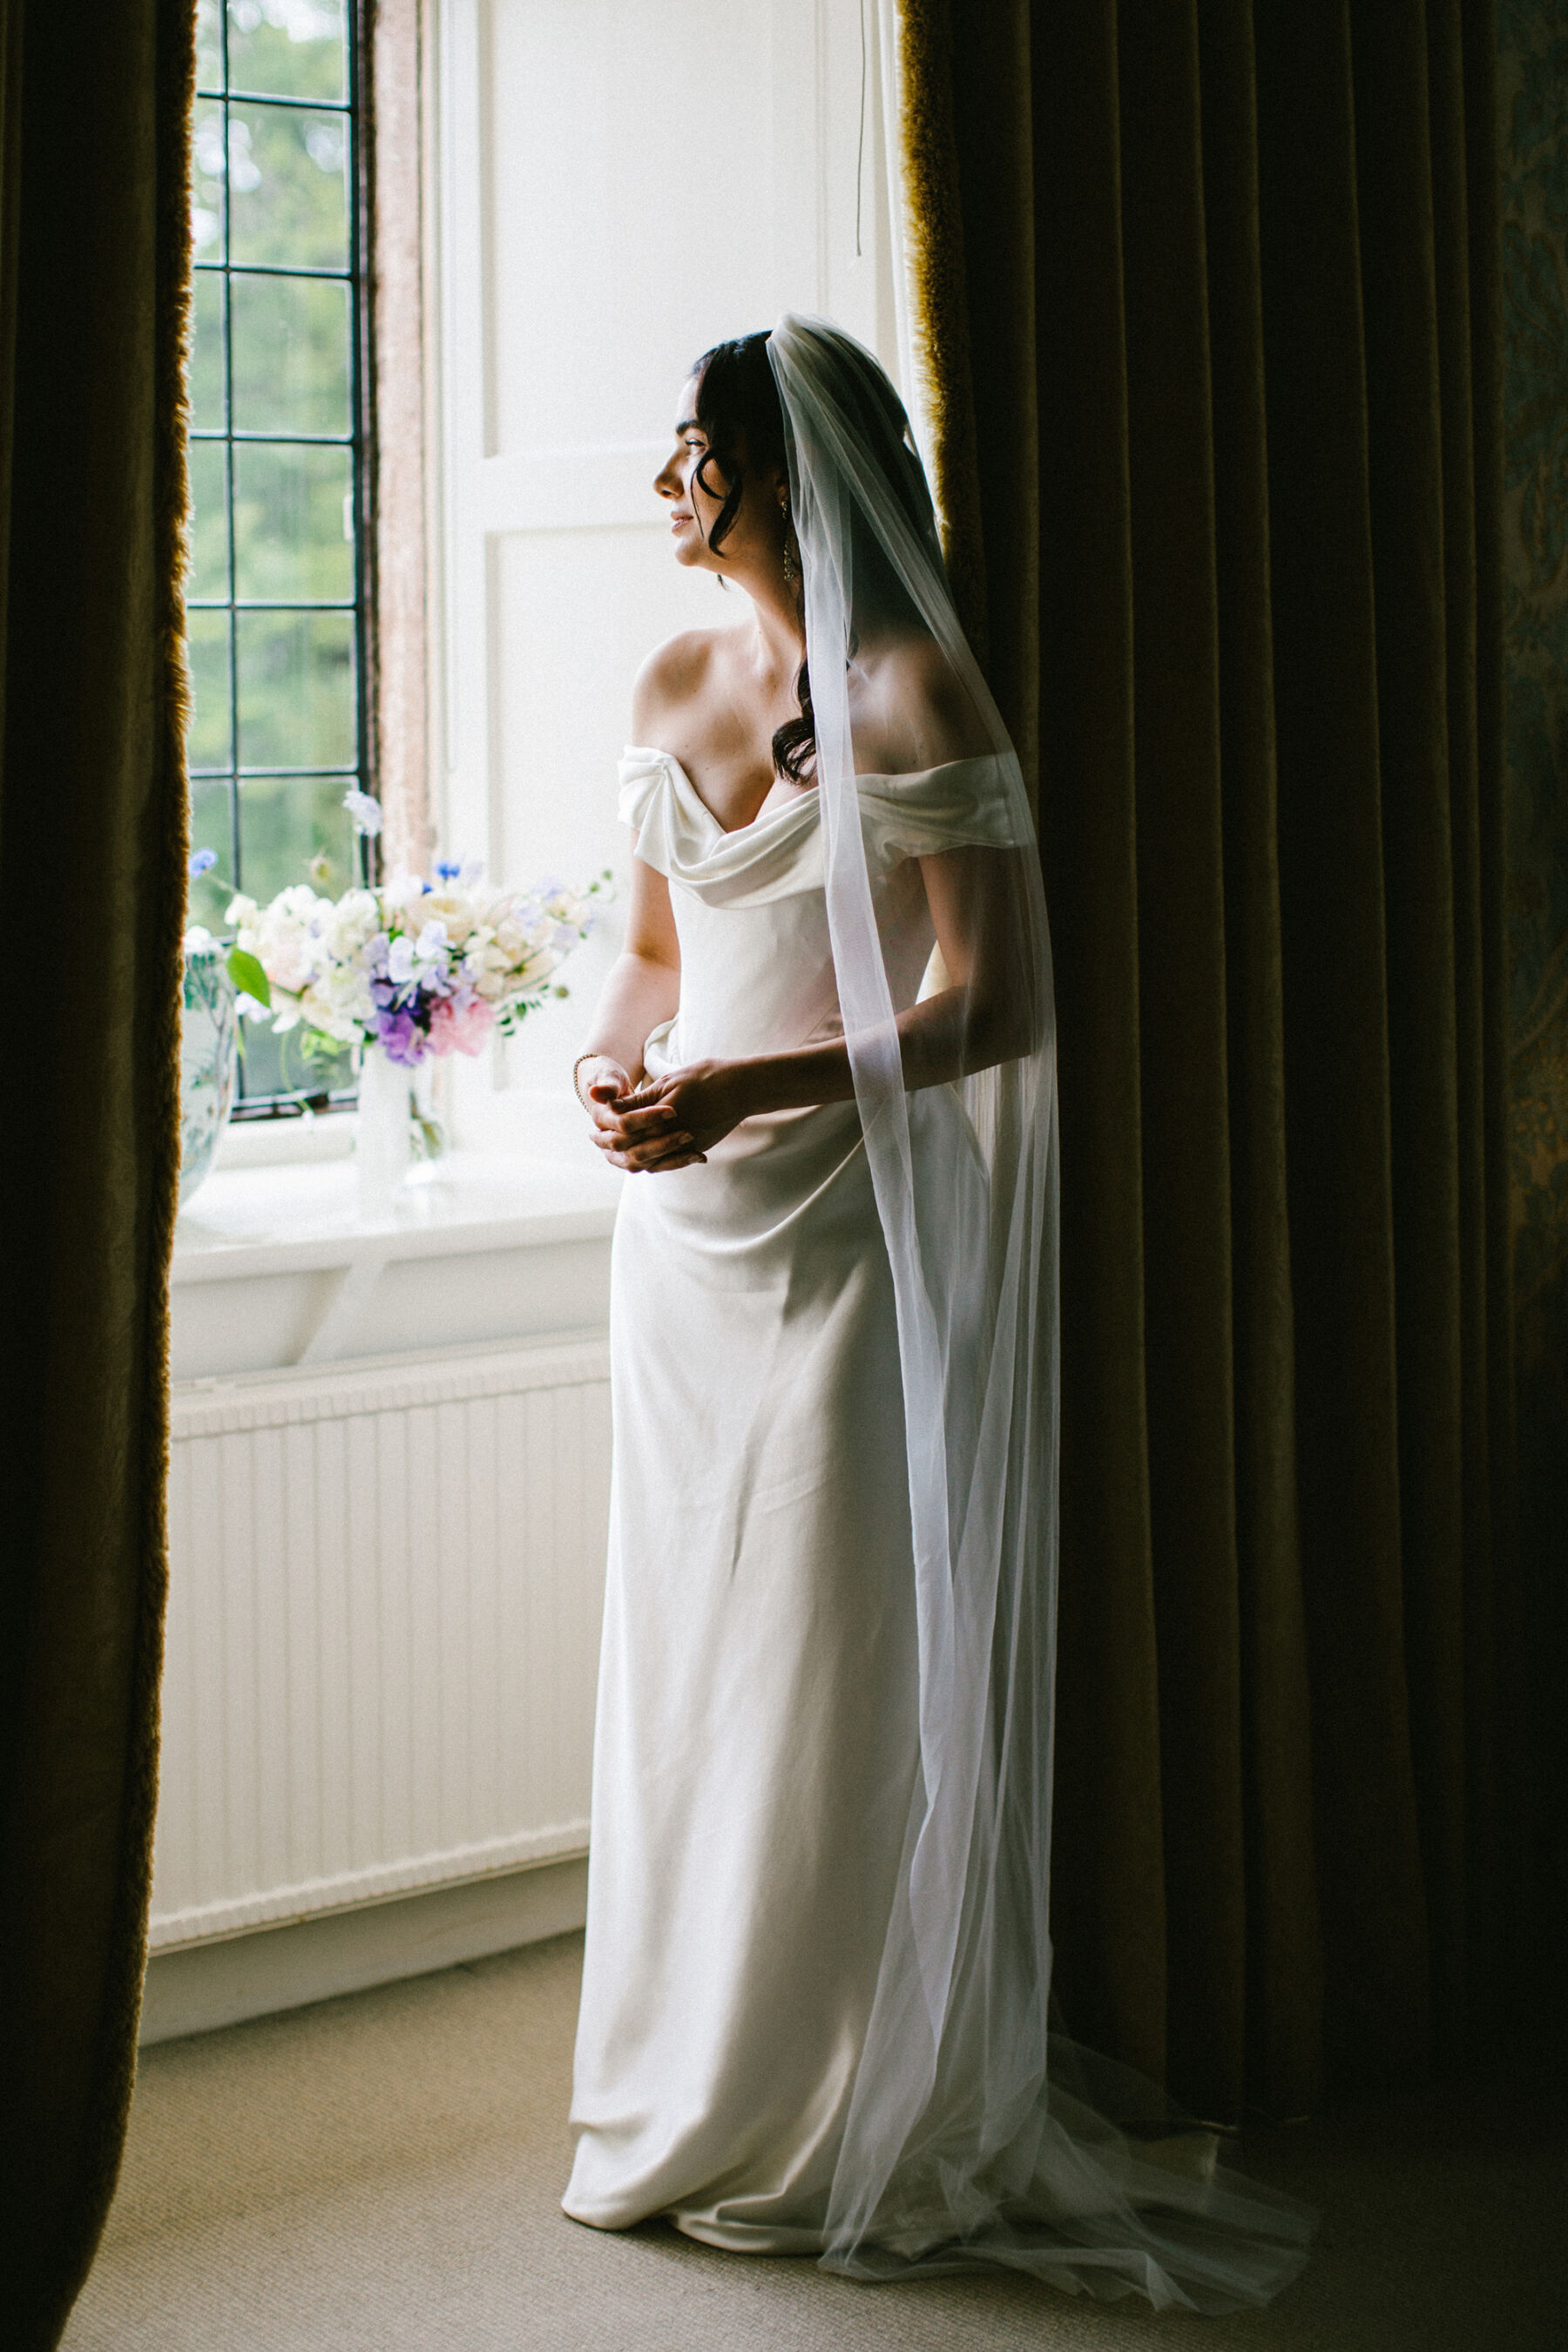 Bride with long dark hair standing next to a window, wearing a Vivienne Westwood wedding dress and a long, single tier wedding veil.